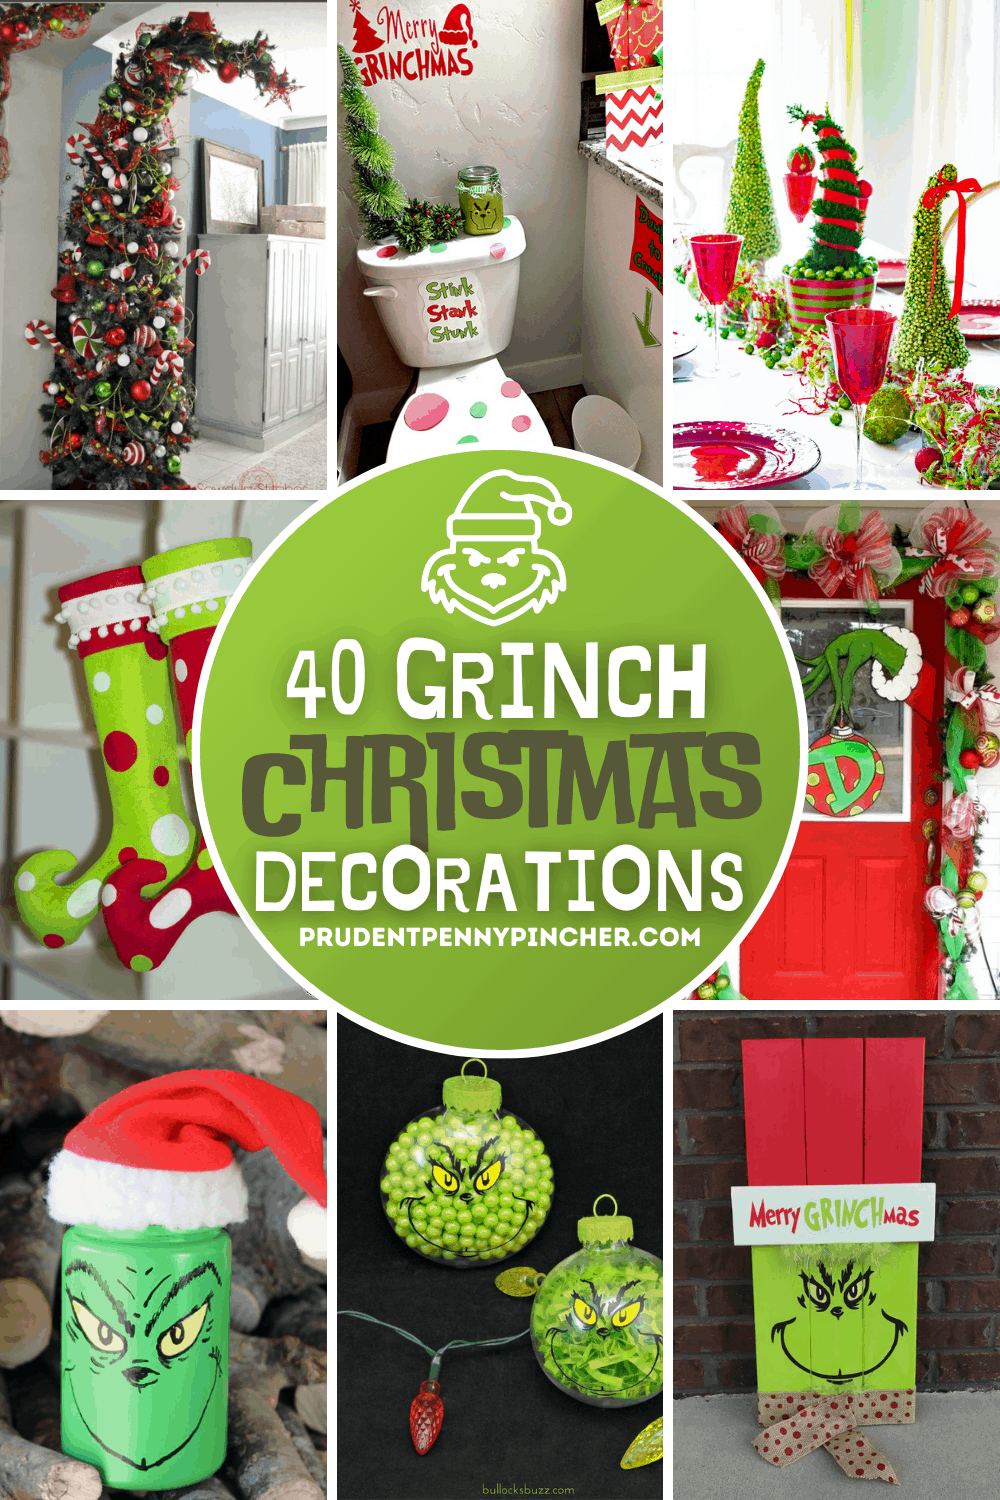 45+ How The Grinch Stole Christmas Decorating Ideas 2021